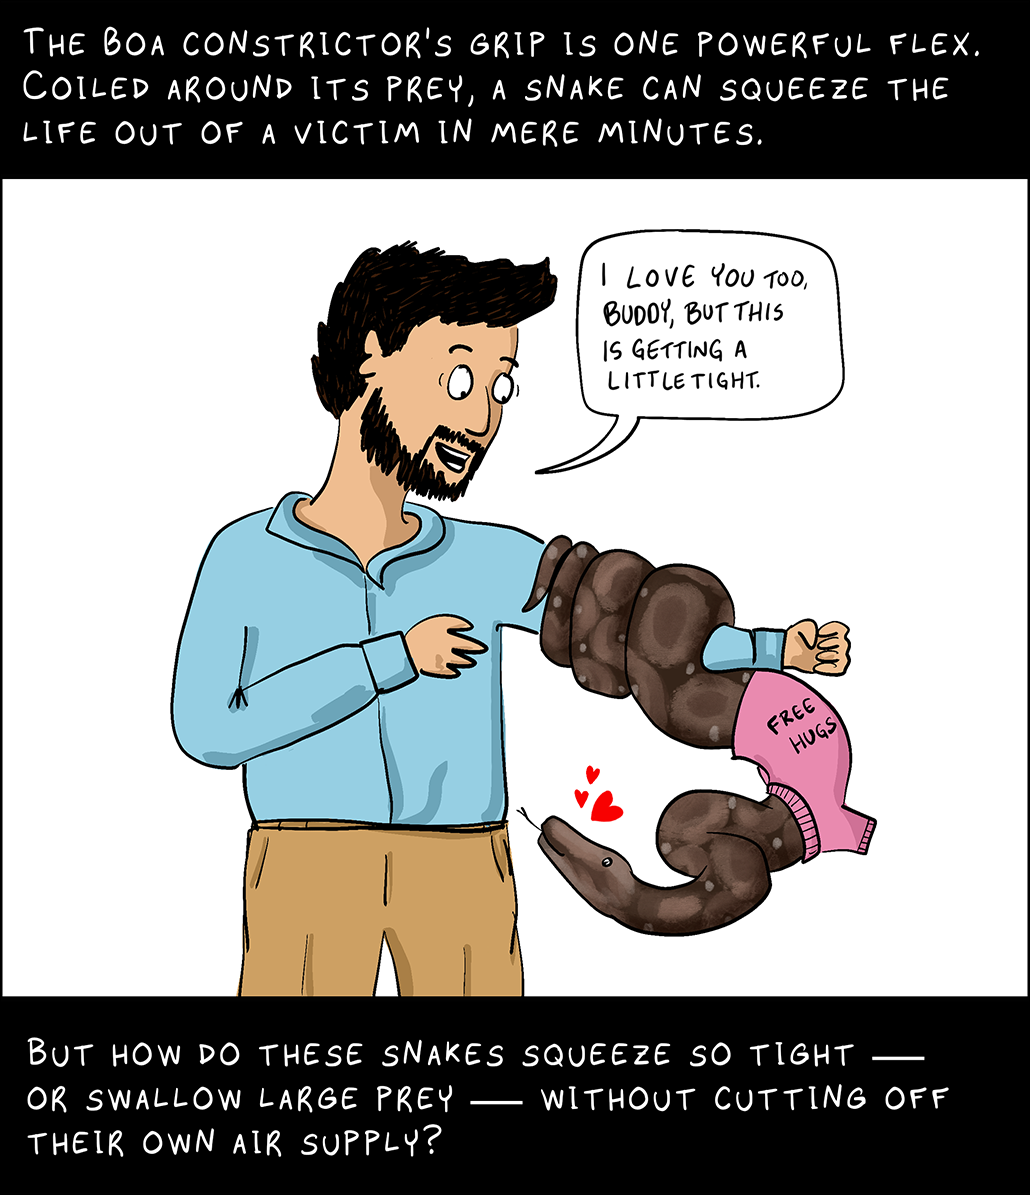 Panel 2. Image: drawing of a man in a blue shirt and brown pants.  He has short dark hair, beard and mustache.  He looks at the boa constrictor wrapped around his arm.  The snake is wearing a shirt that says 